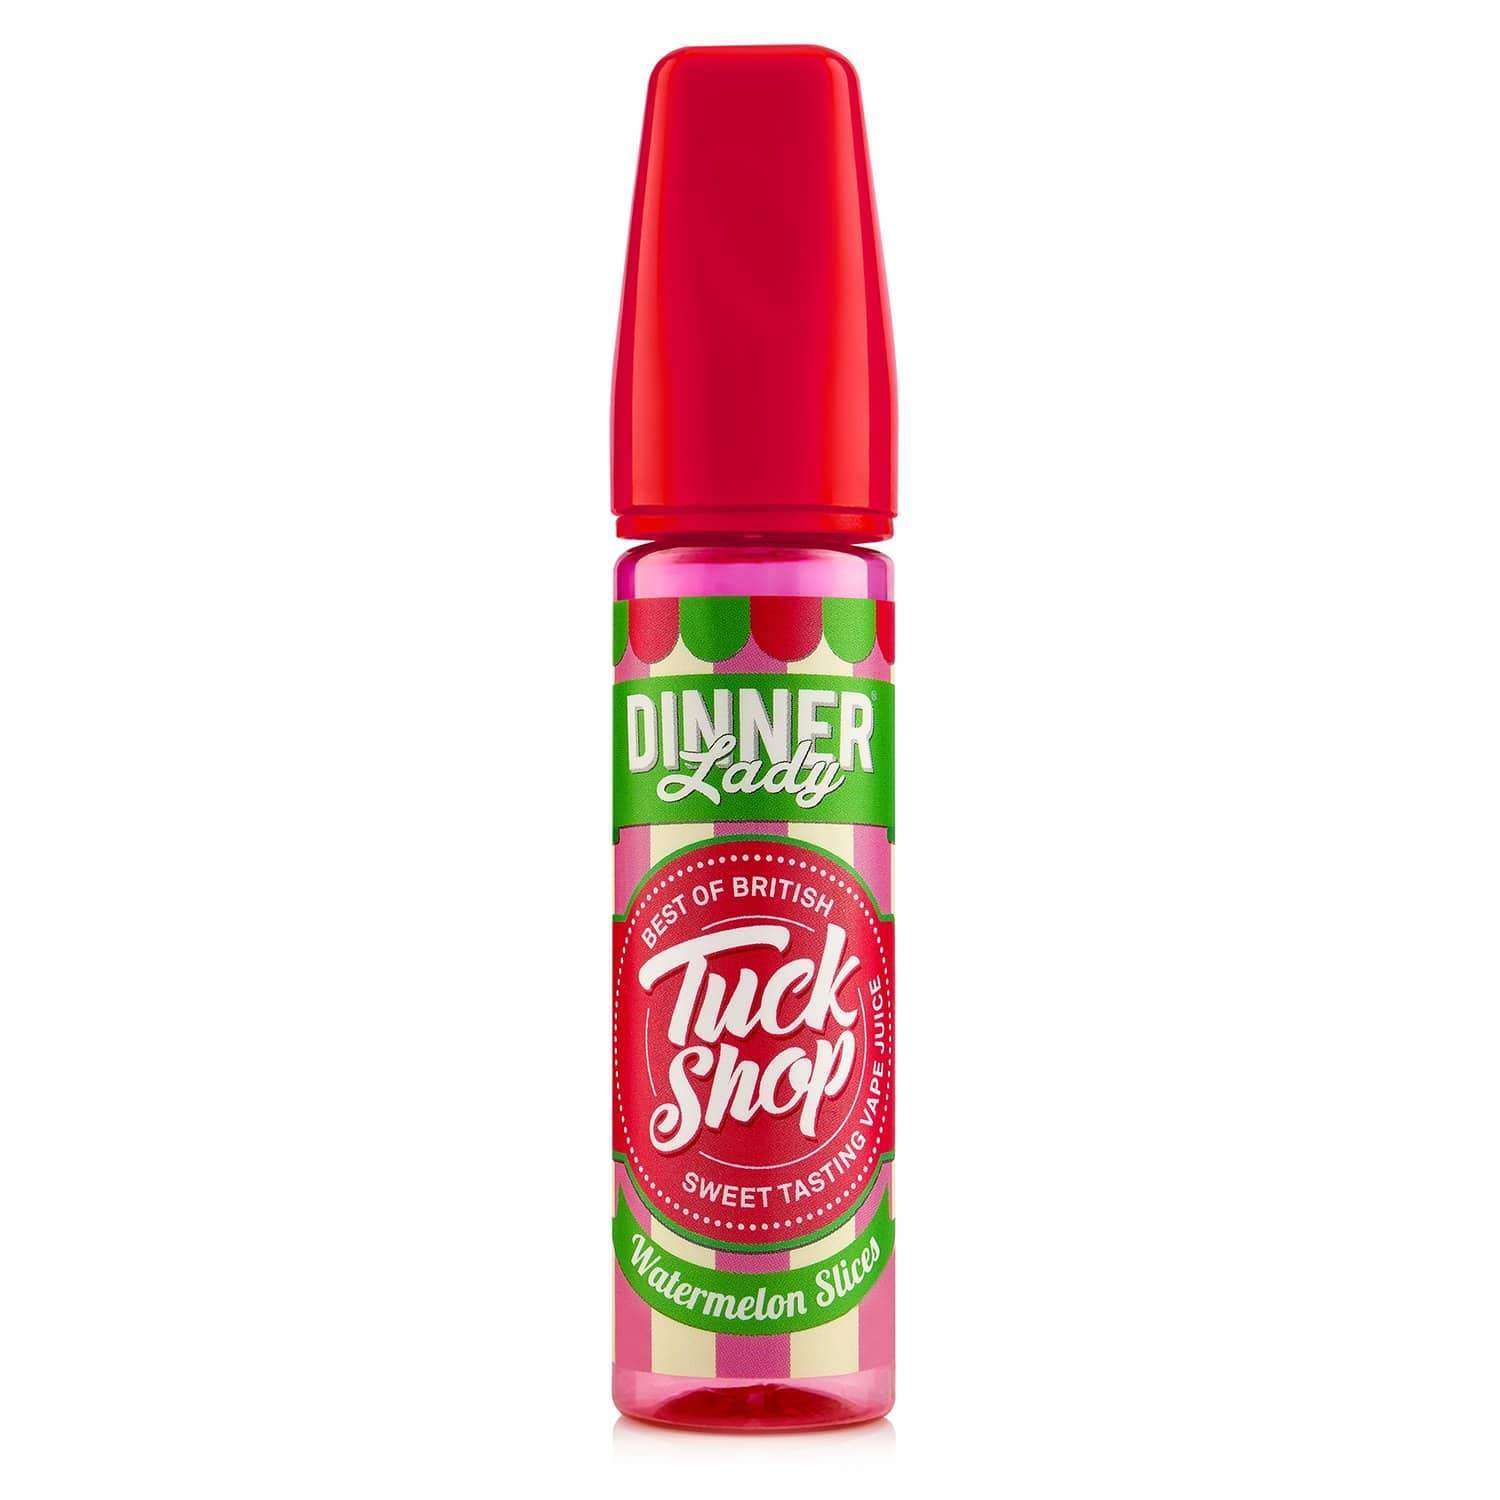 Dinner Lady Sweets - Watermelon Slices - 50ml